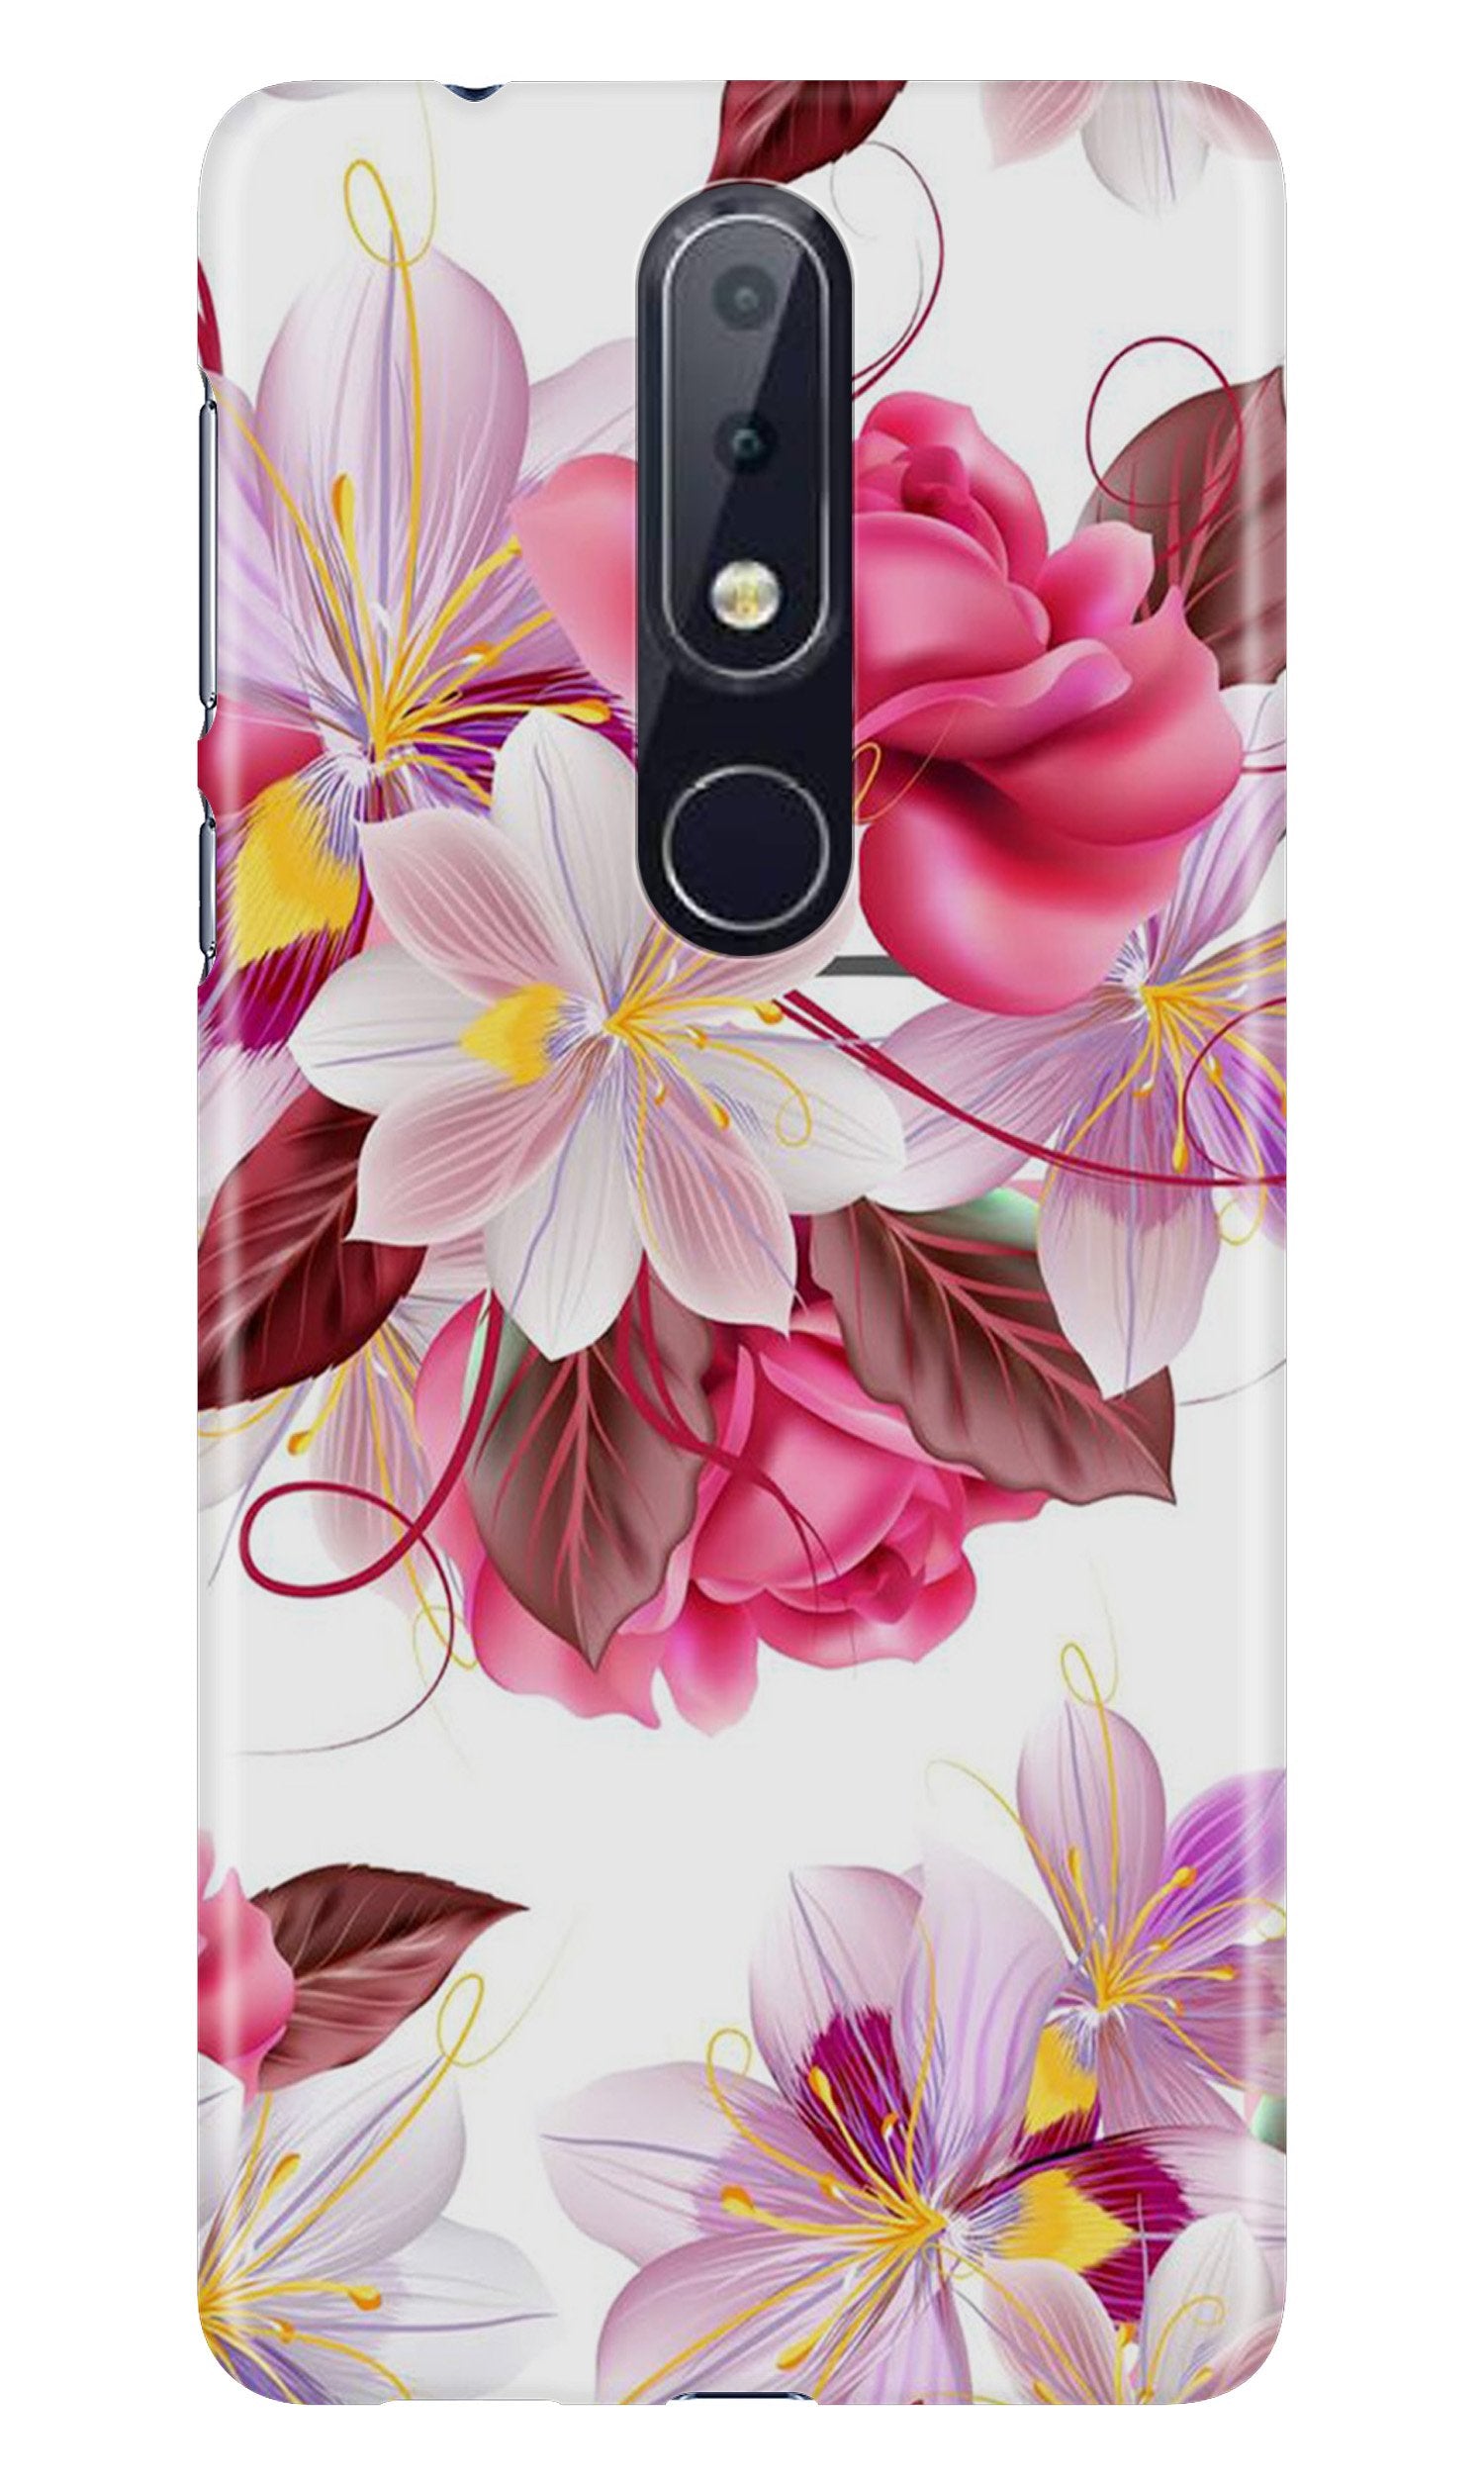 Beautiful flowers Case for Nokia 3.2